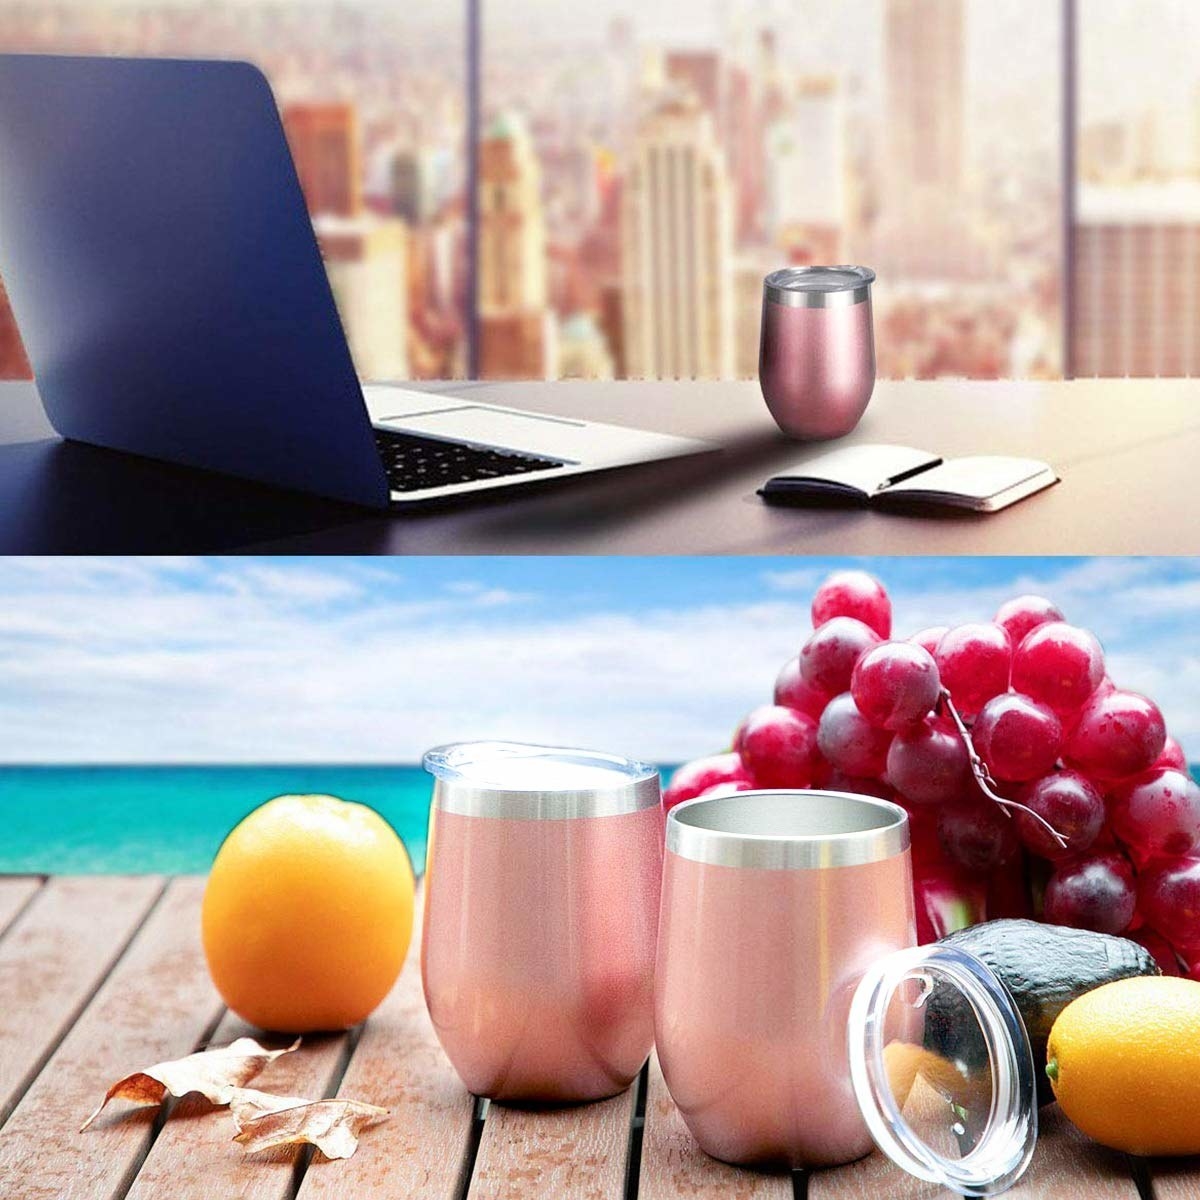 Two images showing a rose gold insulated wine tumbler. In the first image it is kept beside a laptop on a desk and in the second it is surrounded by fruits